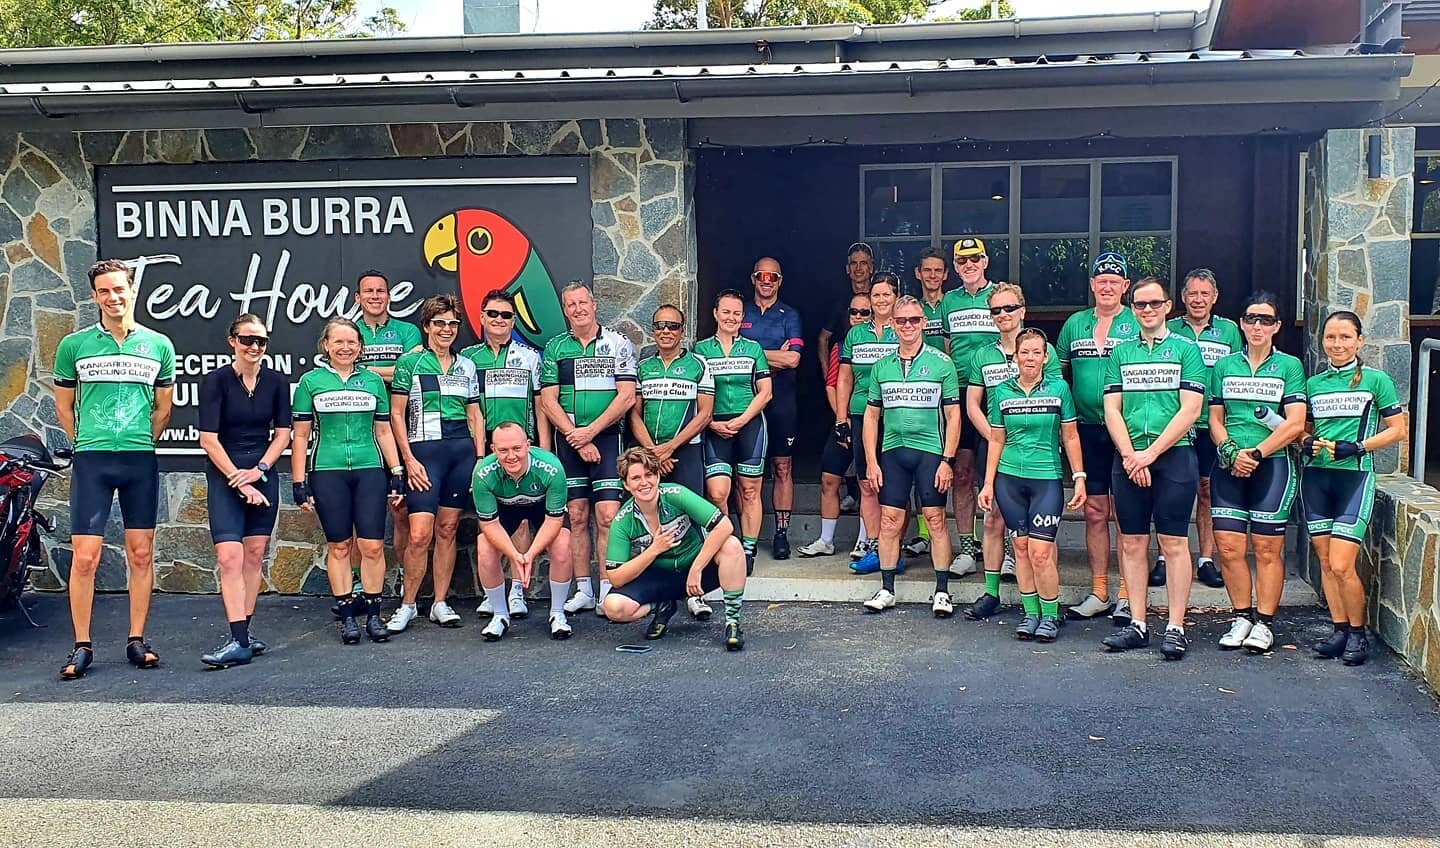 Fantastic turnout for our KPCC Sunday Clubbie to Binna Burra. Congratulations to our clubmates who conquered the mountain for the first time 👍🚴&zwj;♀️⛰ #greenwhiteblack #clublife #kangaroopointcc #championsystem #binnaburra #sundayclubbie